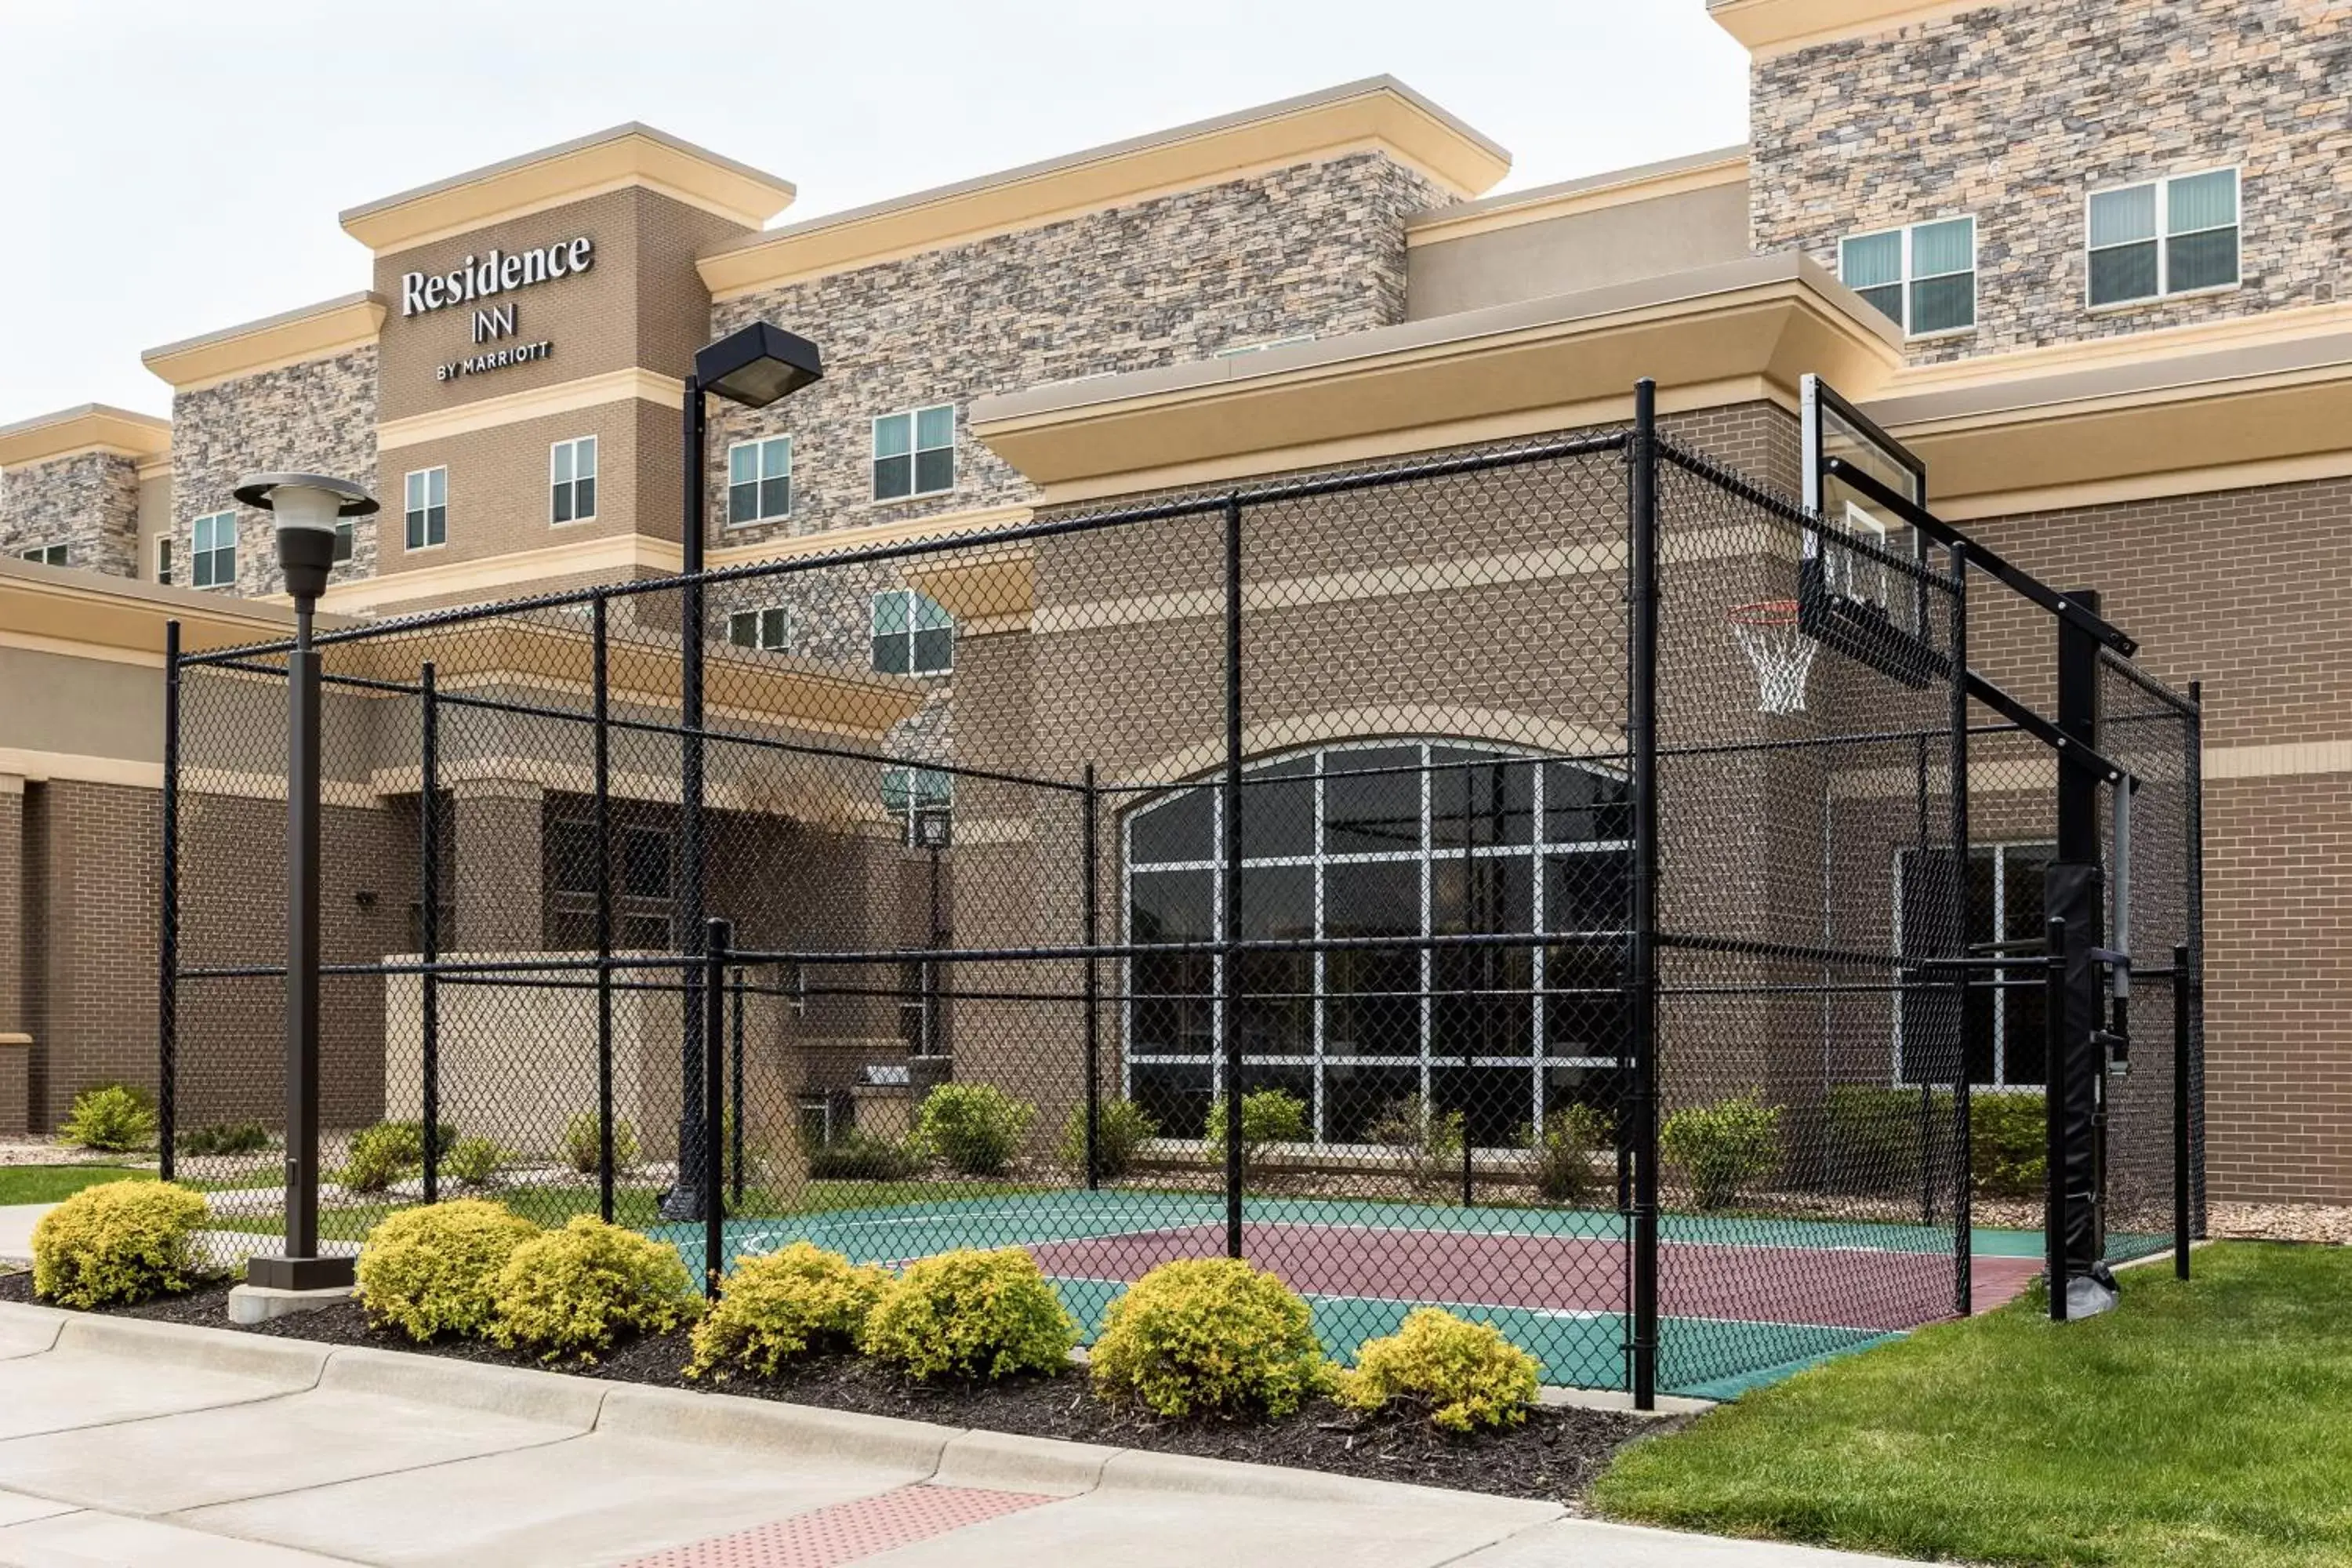 Sports, Property Building in Residence Inn by Marriott Kansas City at The Legends